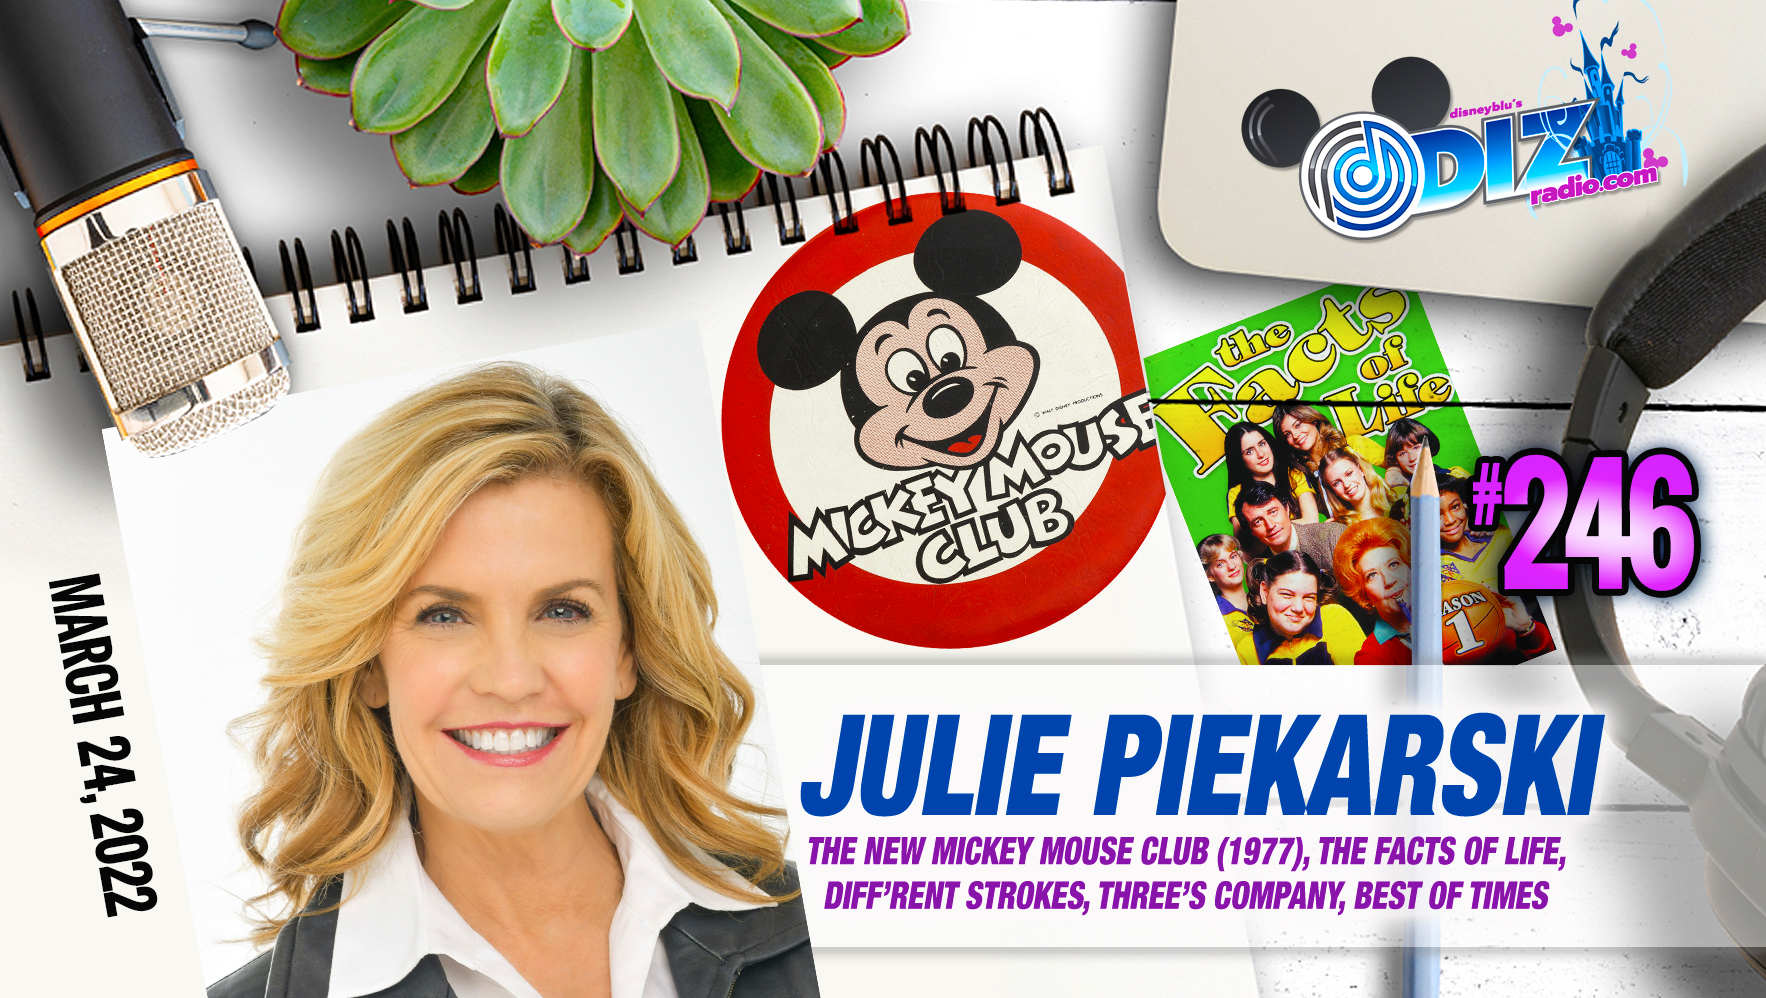 DizRadio Show #246: Guest JULIE PIEKARSKI (New Mickey Mouse Club 1977, The Facts of Life, Three's Company, Diff'rent Strokes, Best of Times)